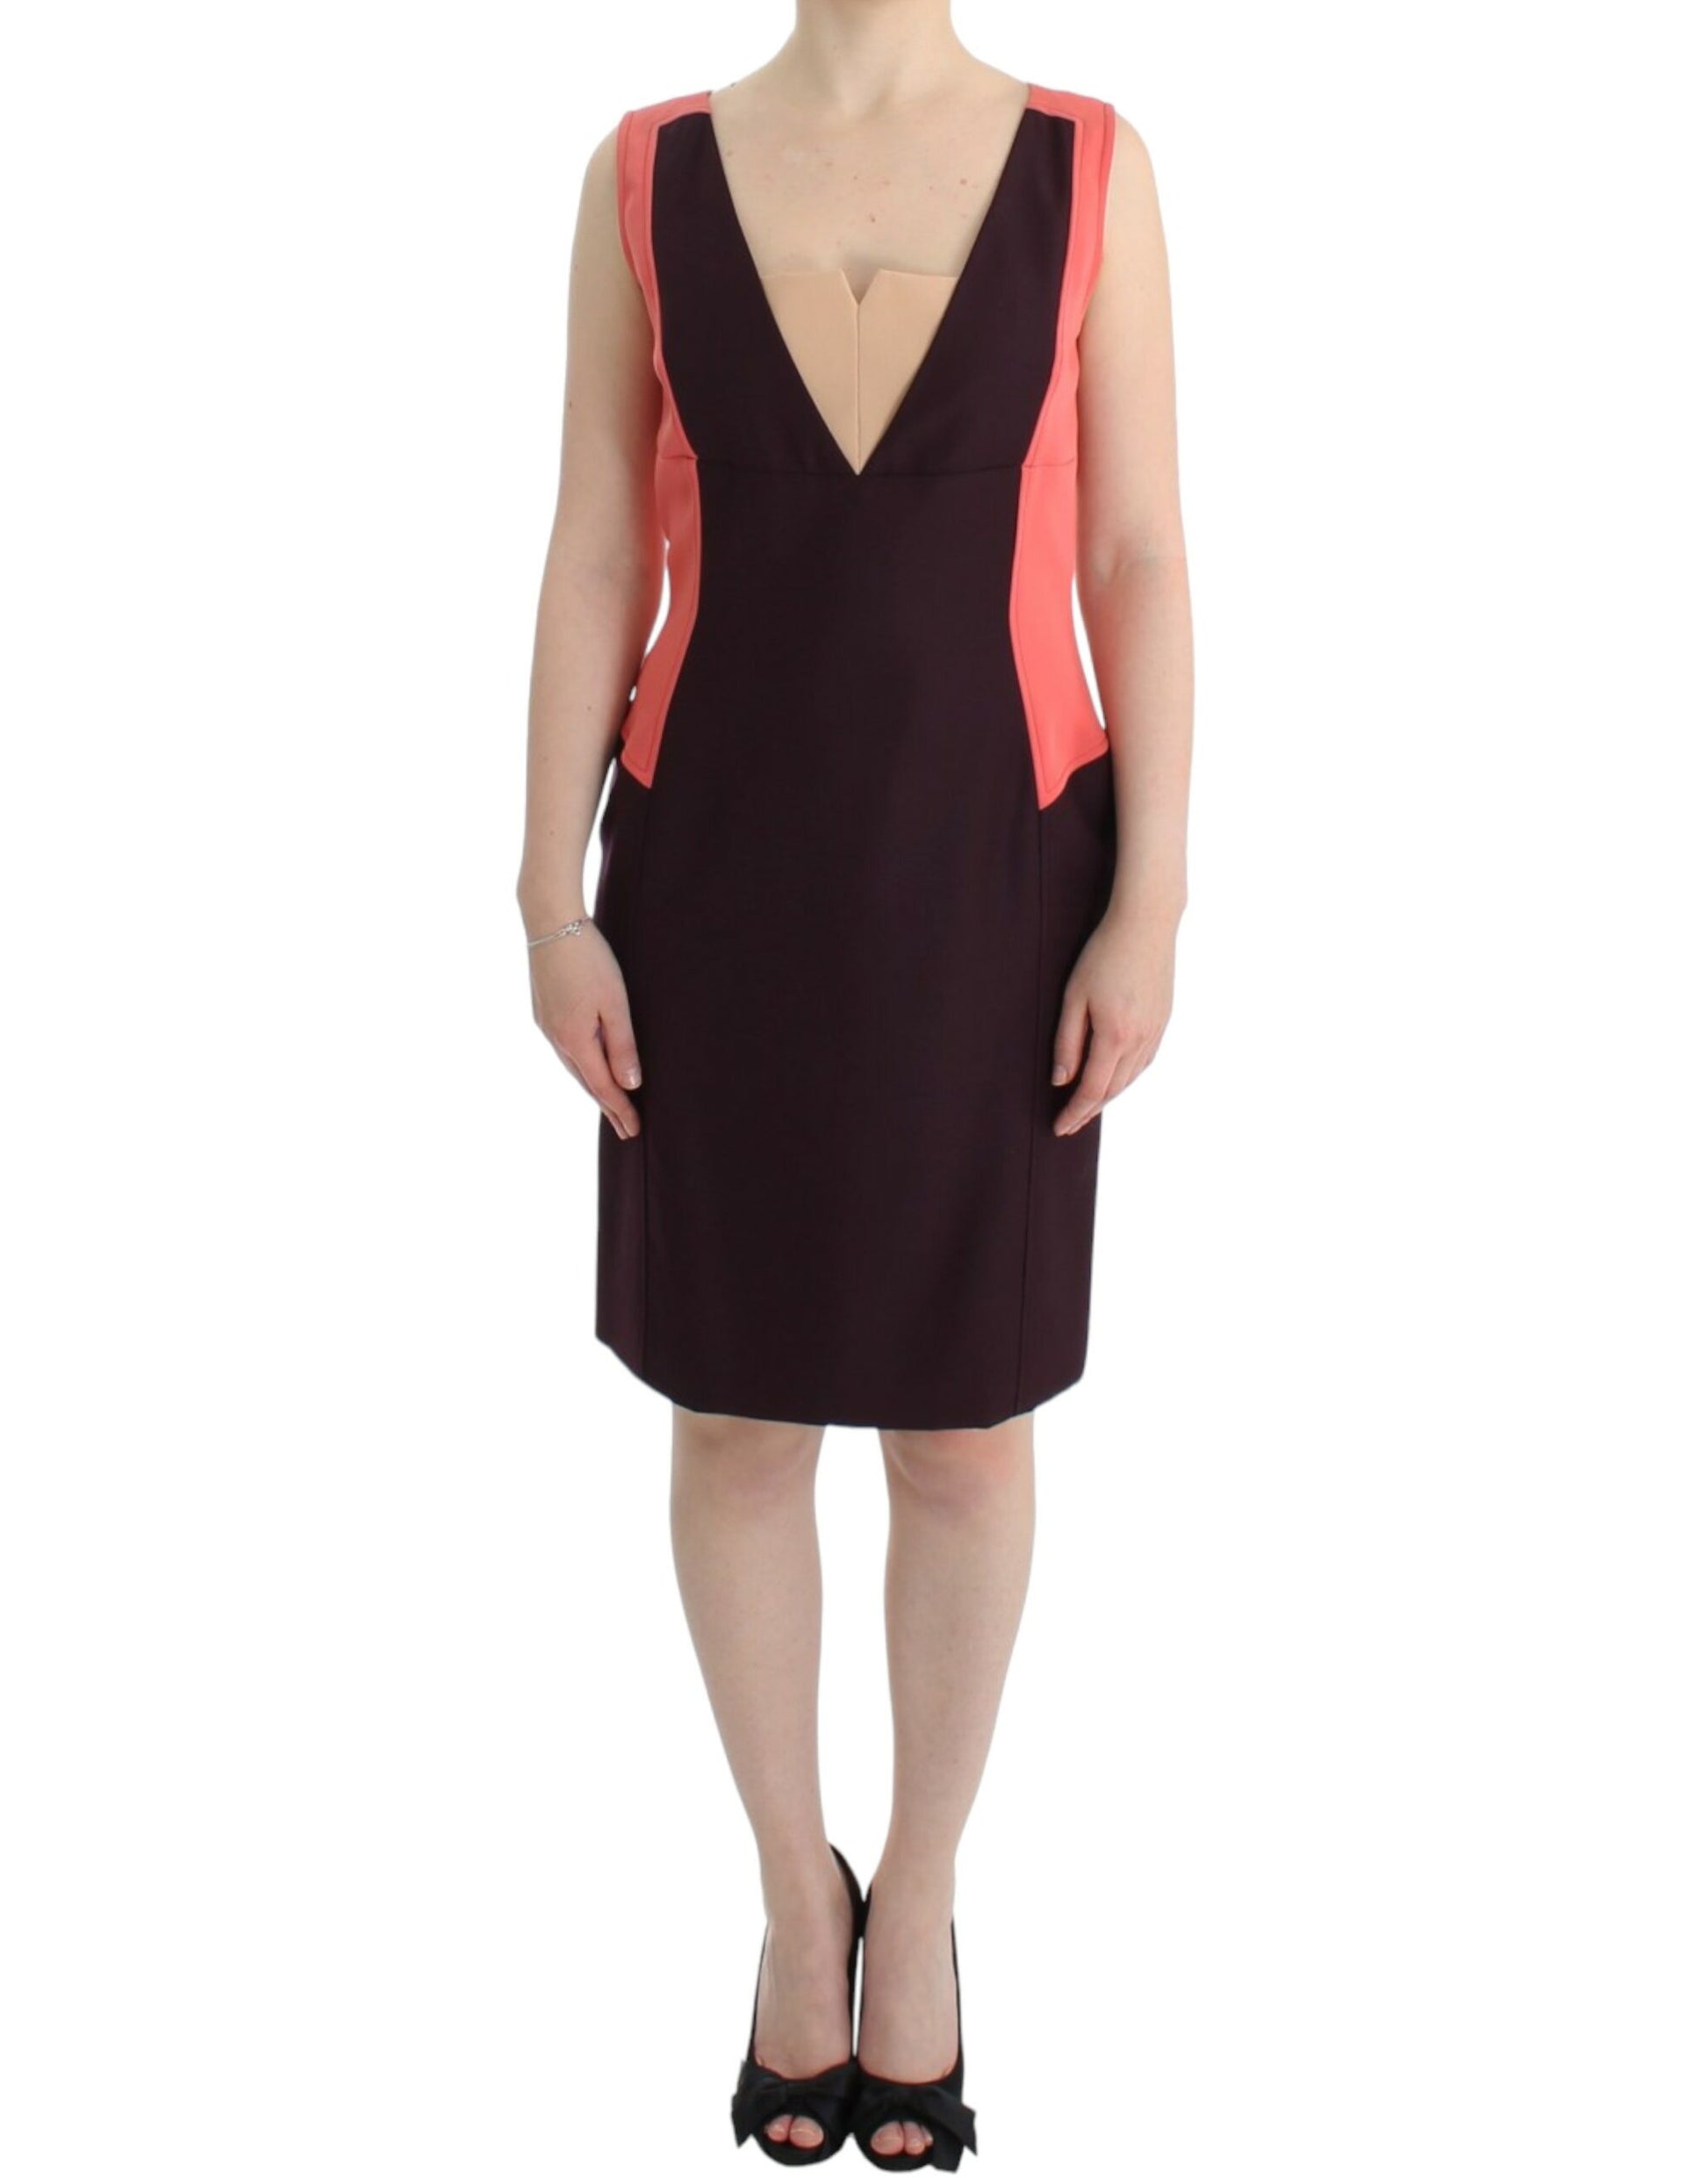 CO|TE Multicolor Pencil Dress with Artistic Flair - Gio Beverly Hills